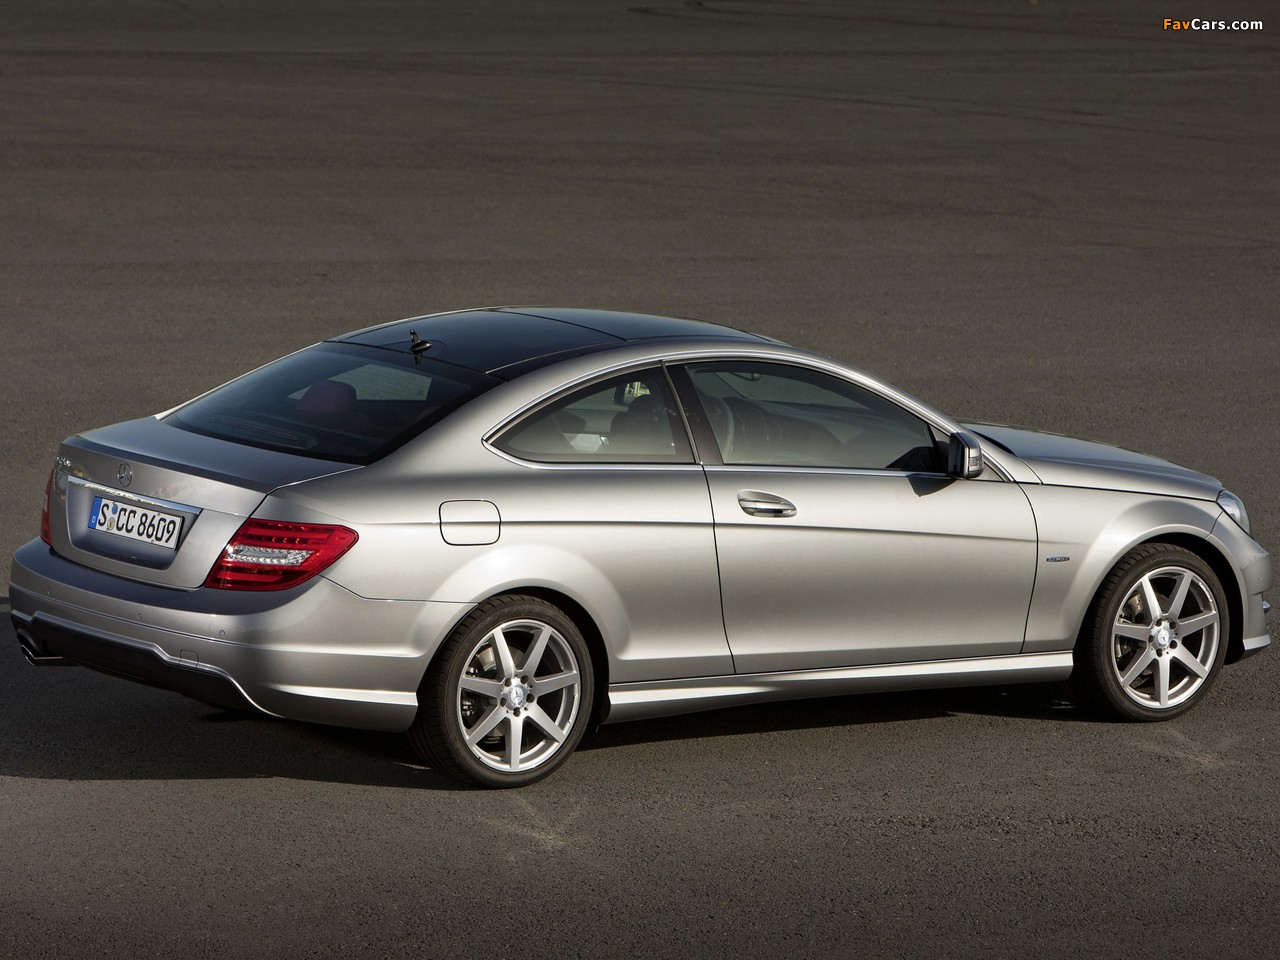 Mercedes-Benz C 250 Coupe (C204) 2011 pictures (1280 x 960)